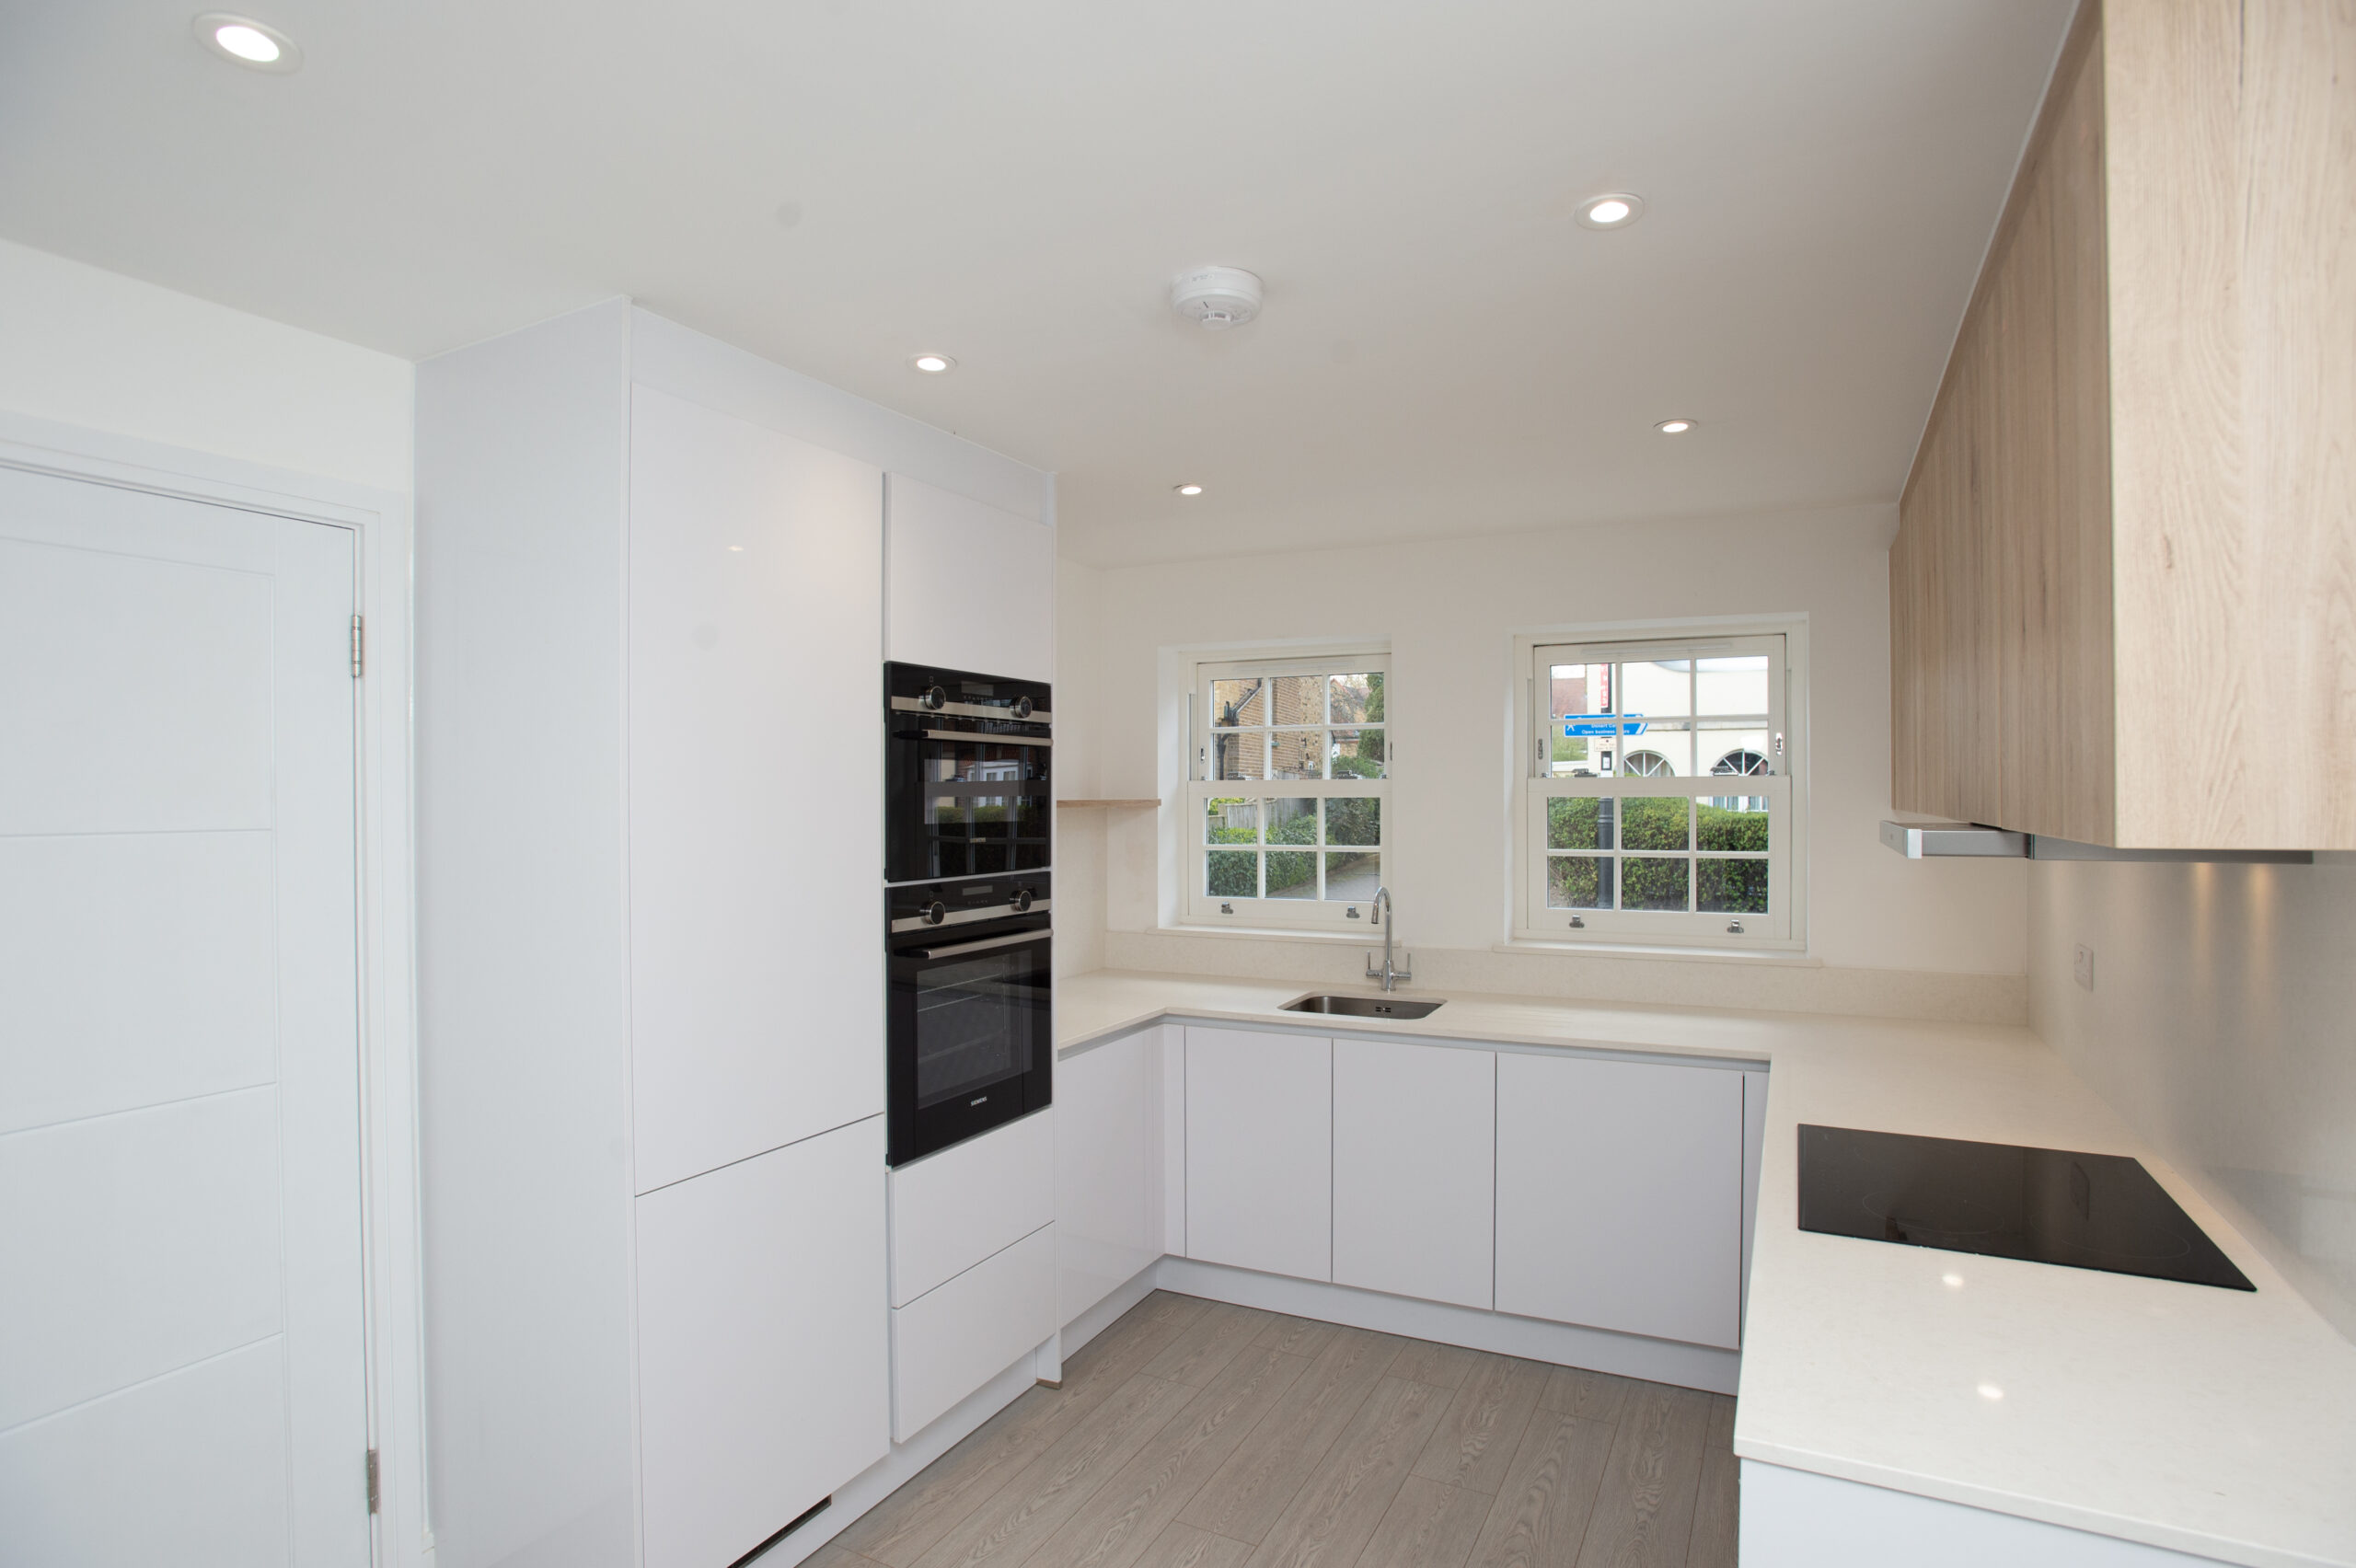 New Build 2 bedroom detached house in one of the best roads in enfield